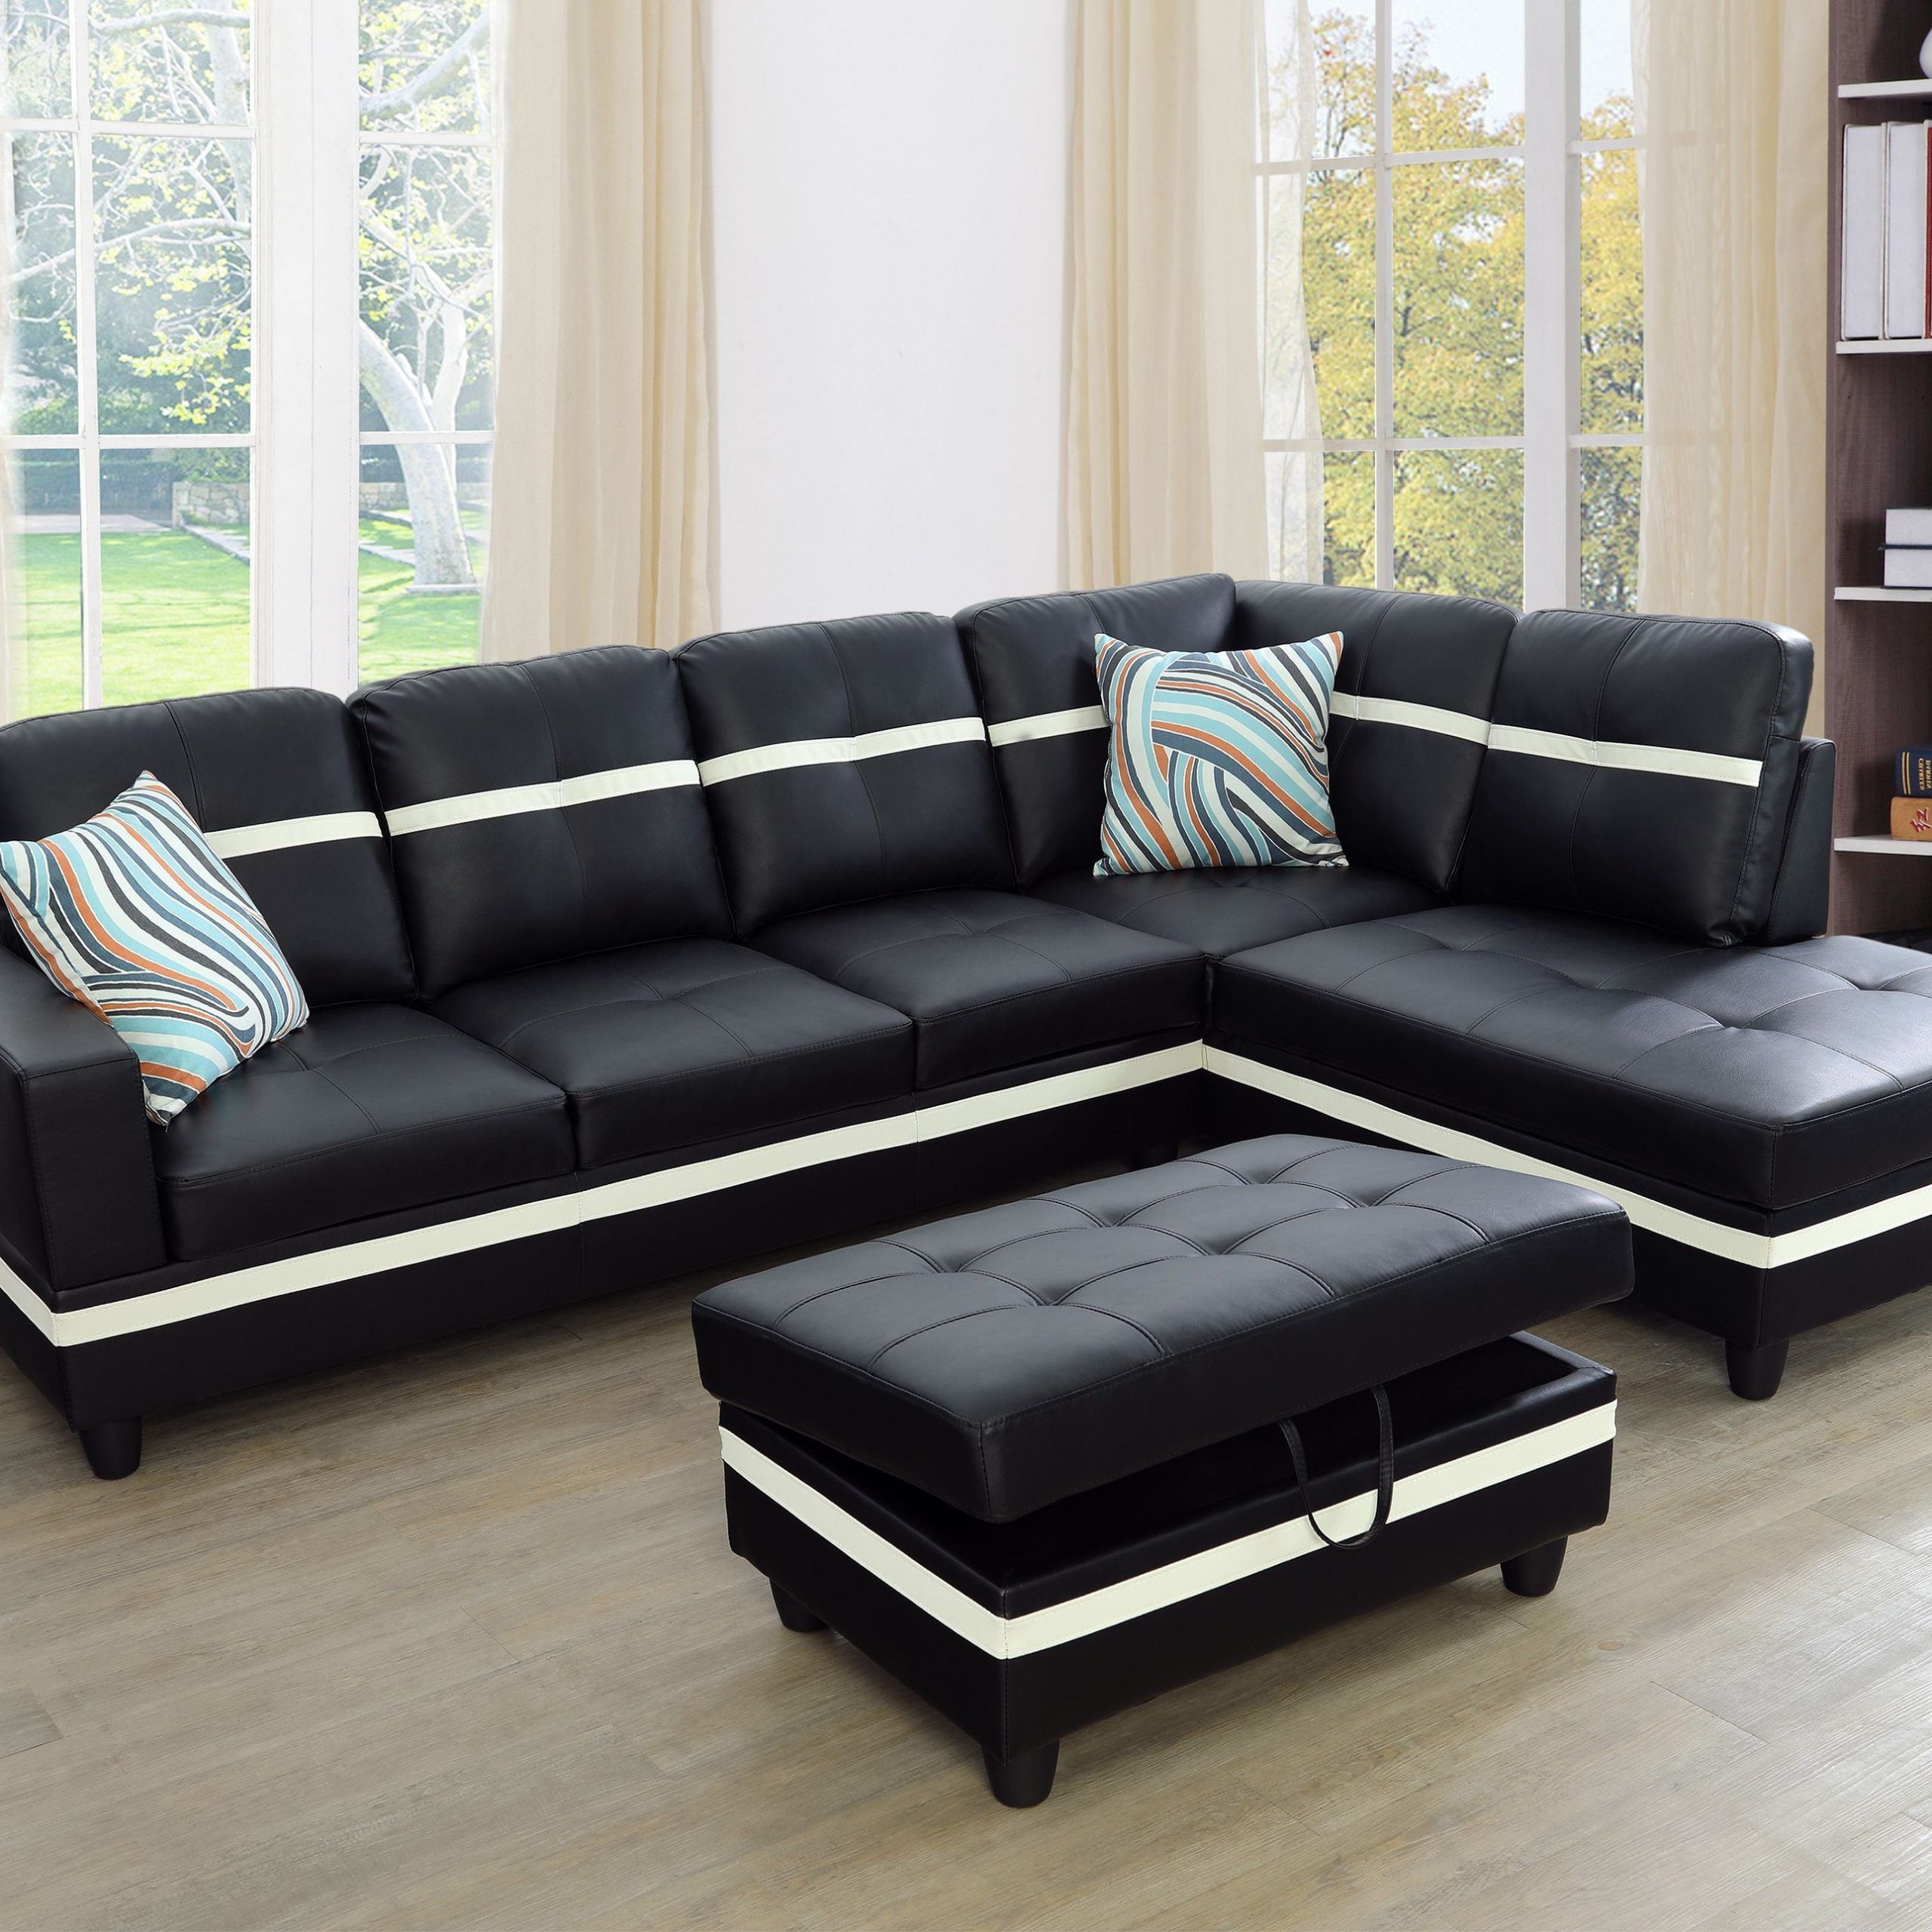 Aycp Furniture New Style  L Shape Sectional Sofa Set With Storage Within Right Facing Black Sofas (View 3 of 20)